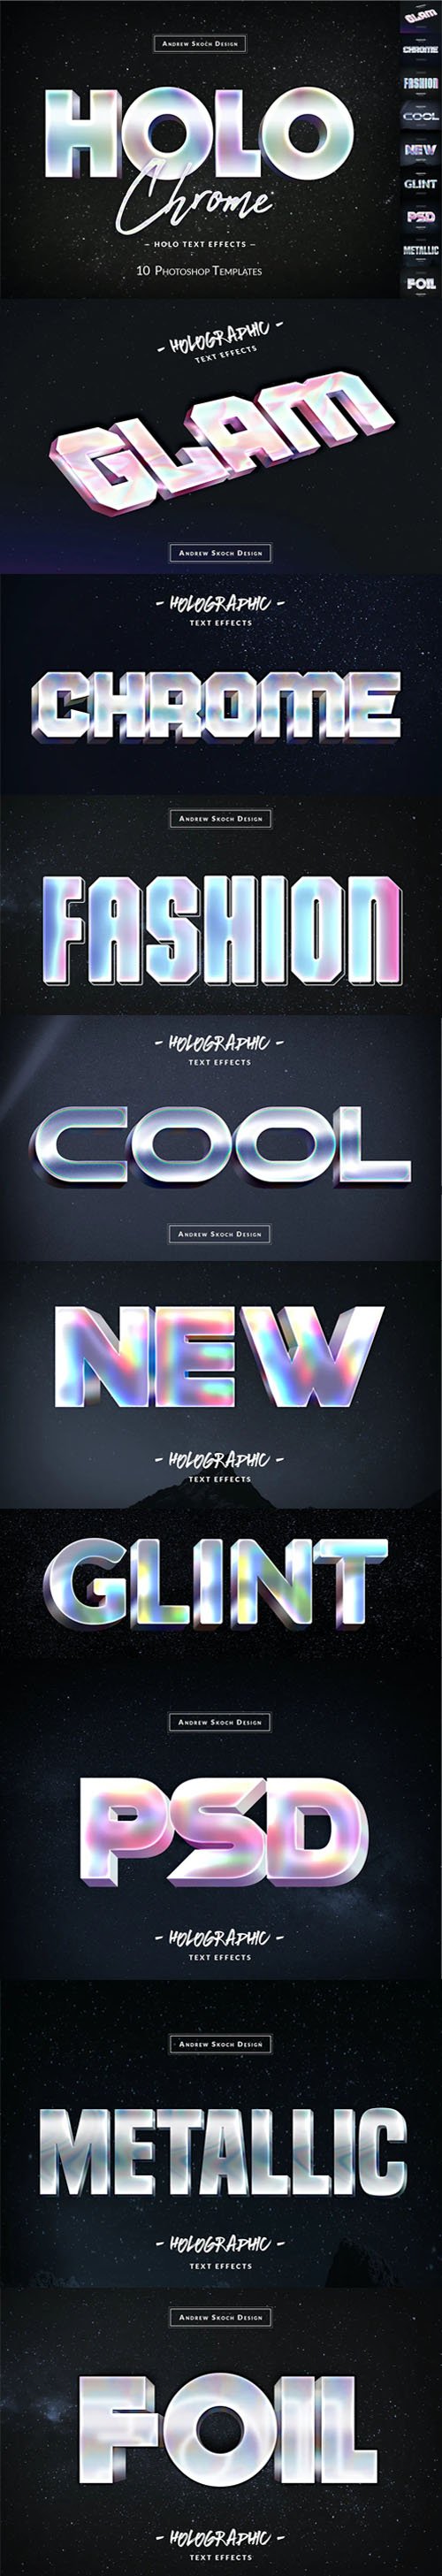 10 Holochrome Photoshop Text Effects Templates